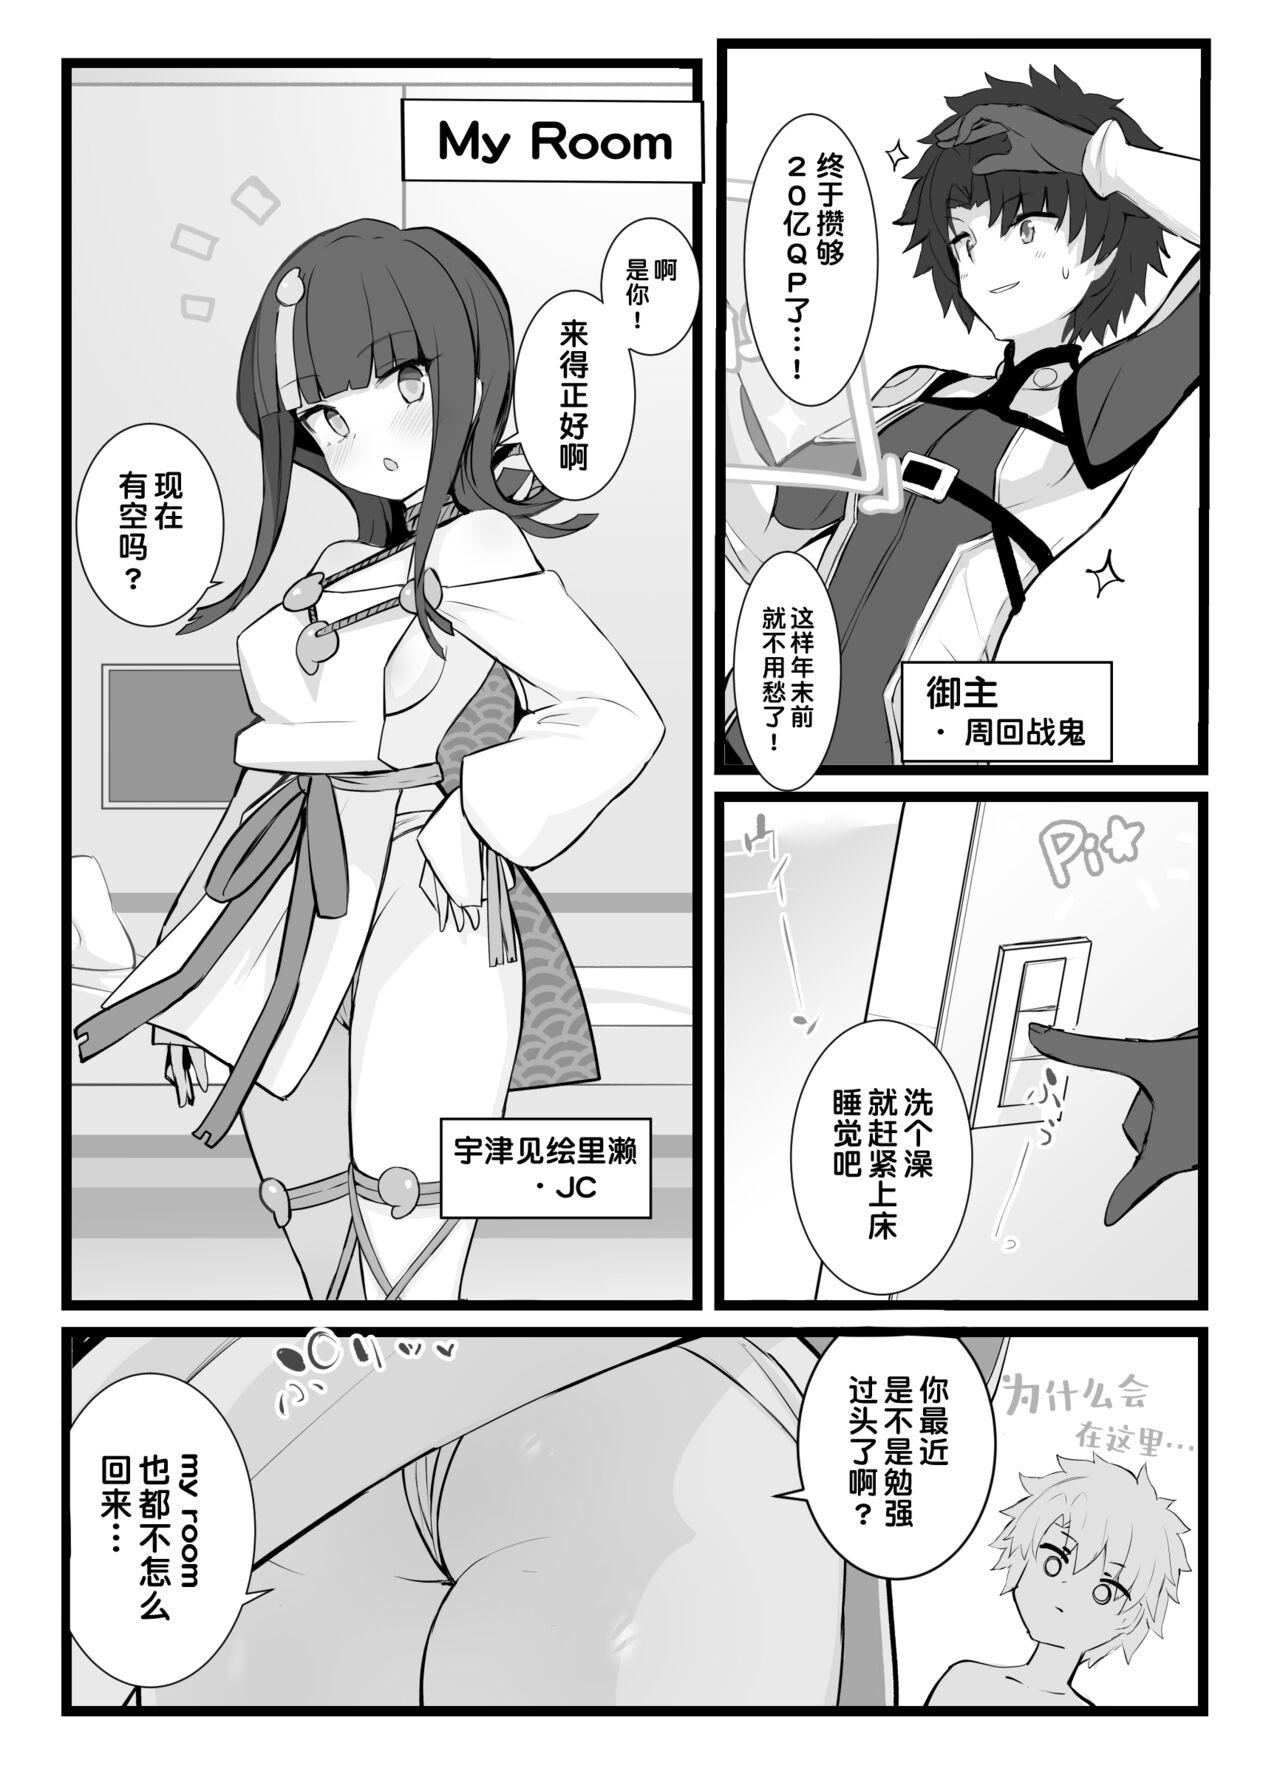 Freaky エリセちゃんととことん着衣エッチ本 - Fate grand order Big Cock - Page 3